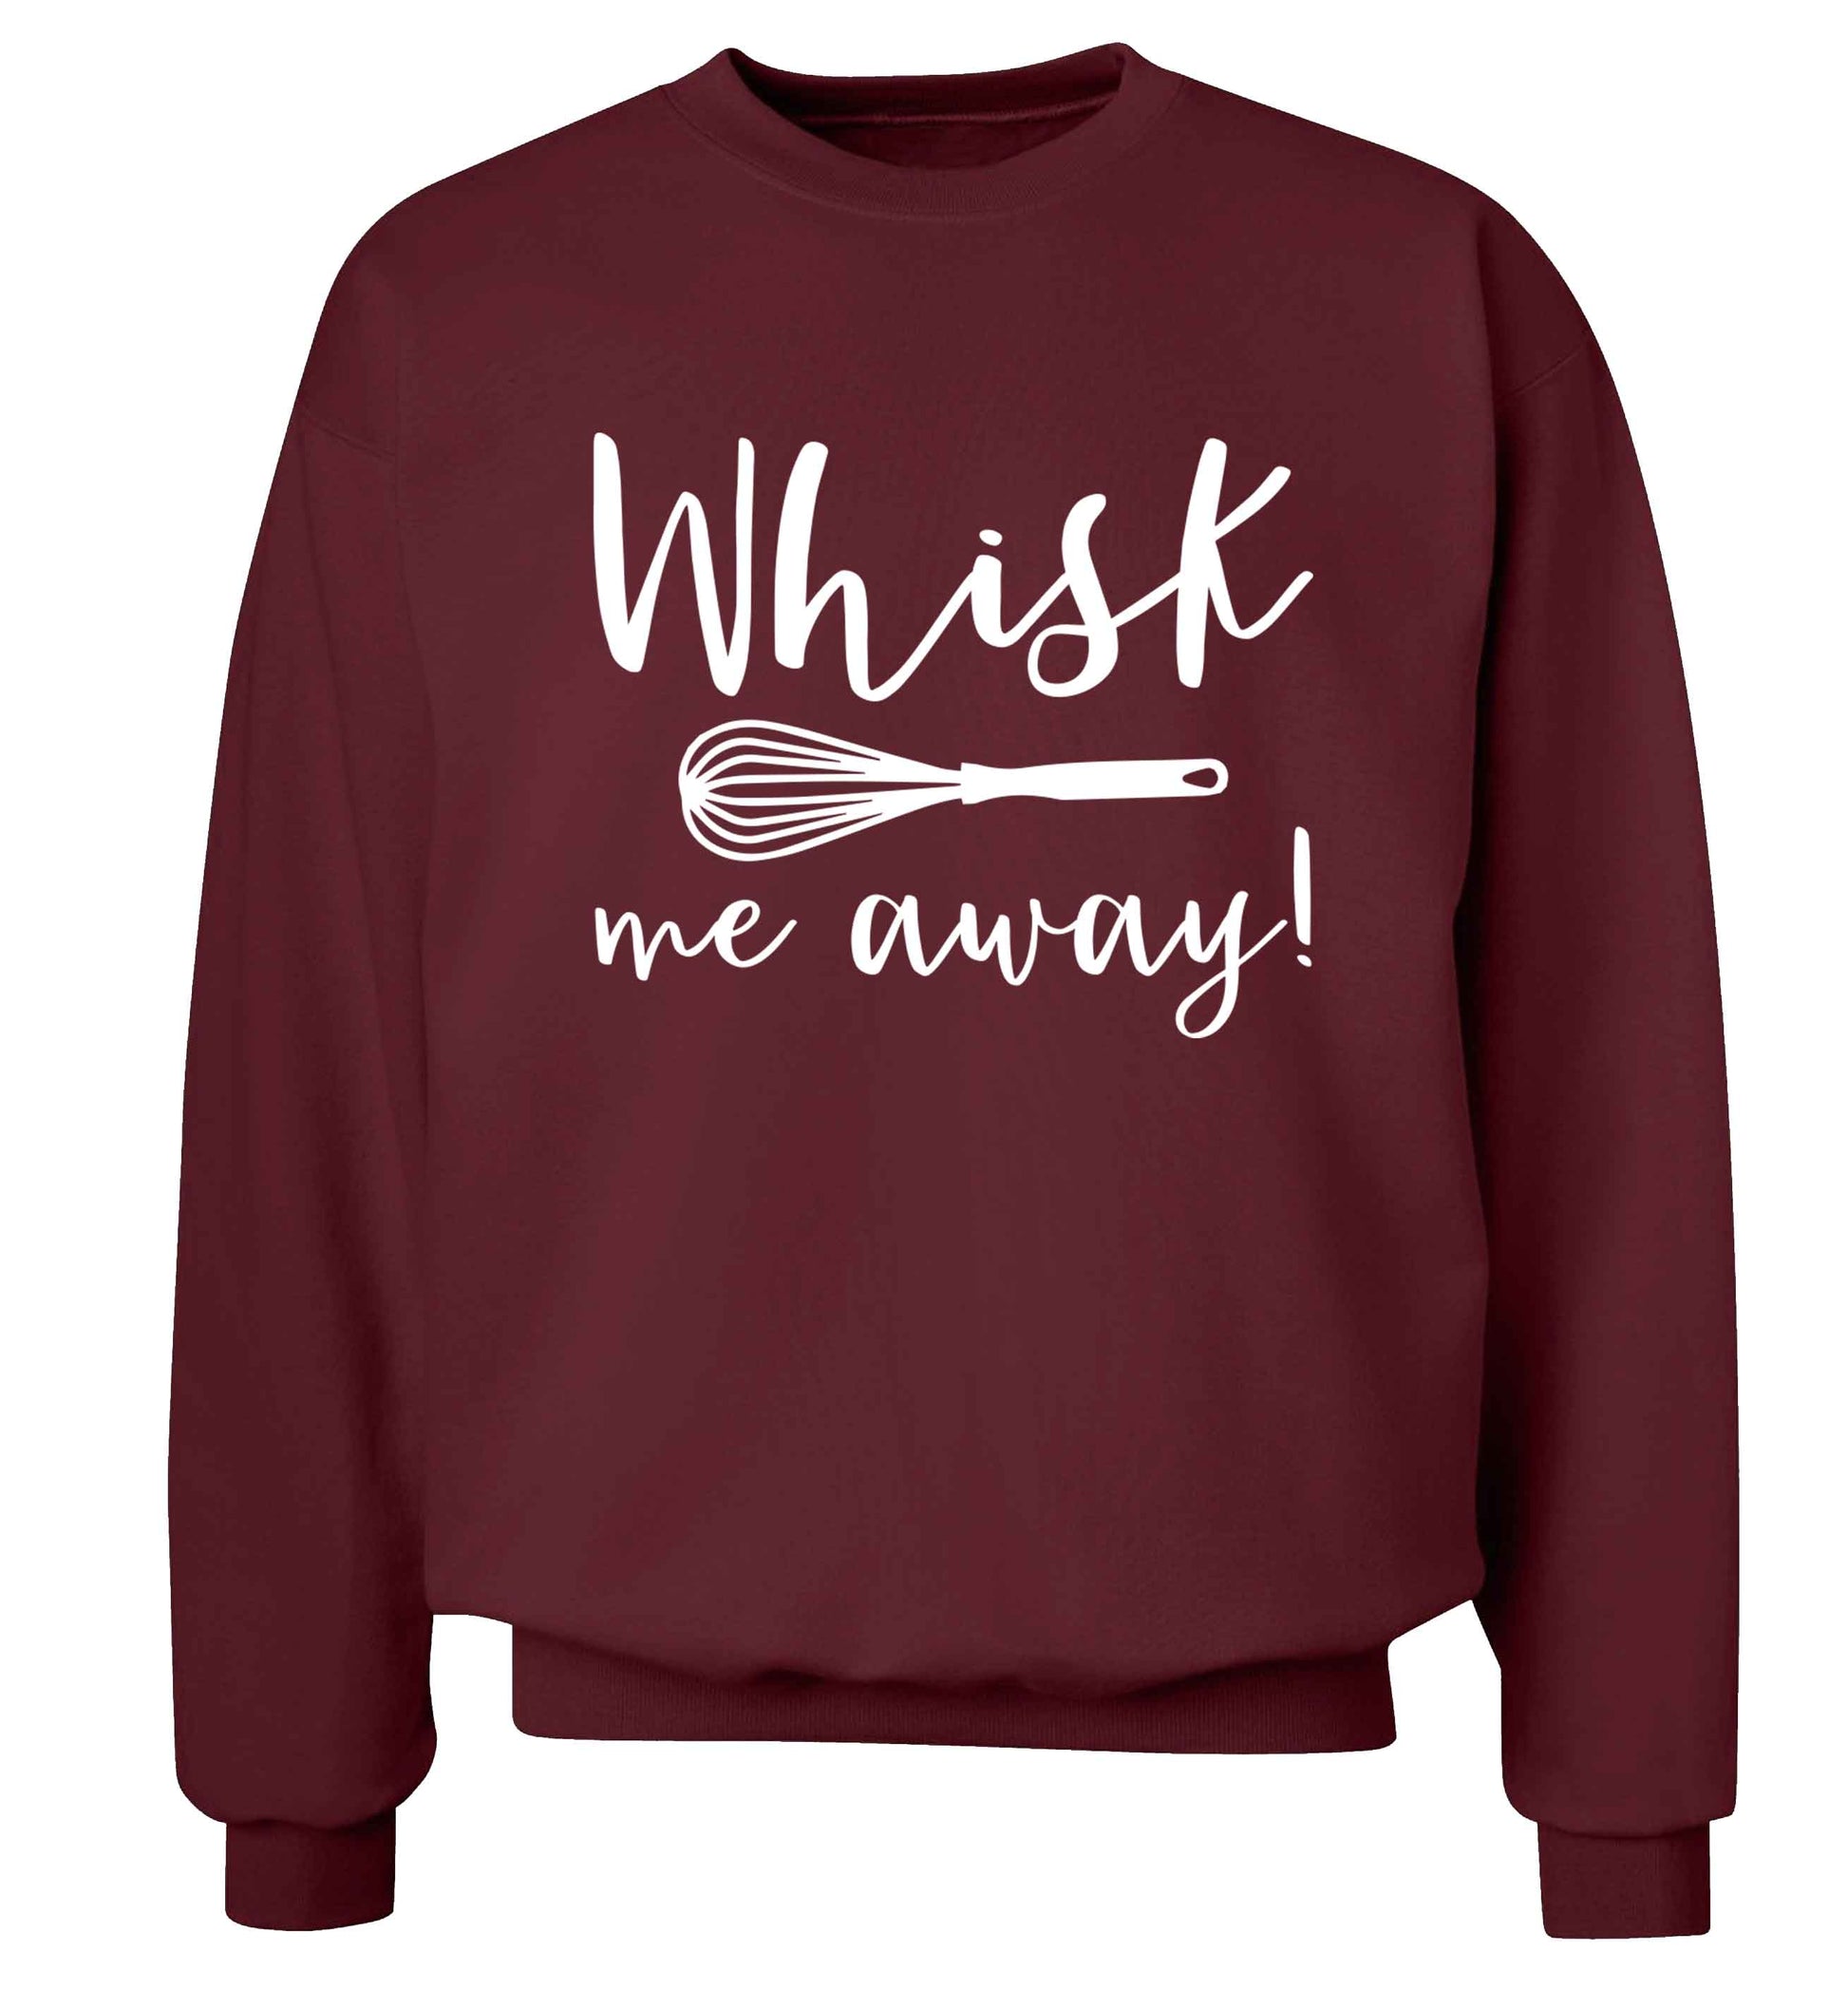 Whisk me away Adult's unisex maroon Sweater 2XL